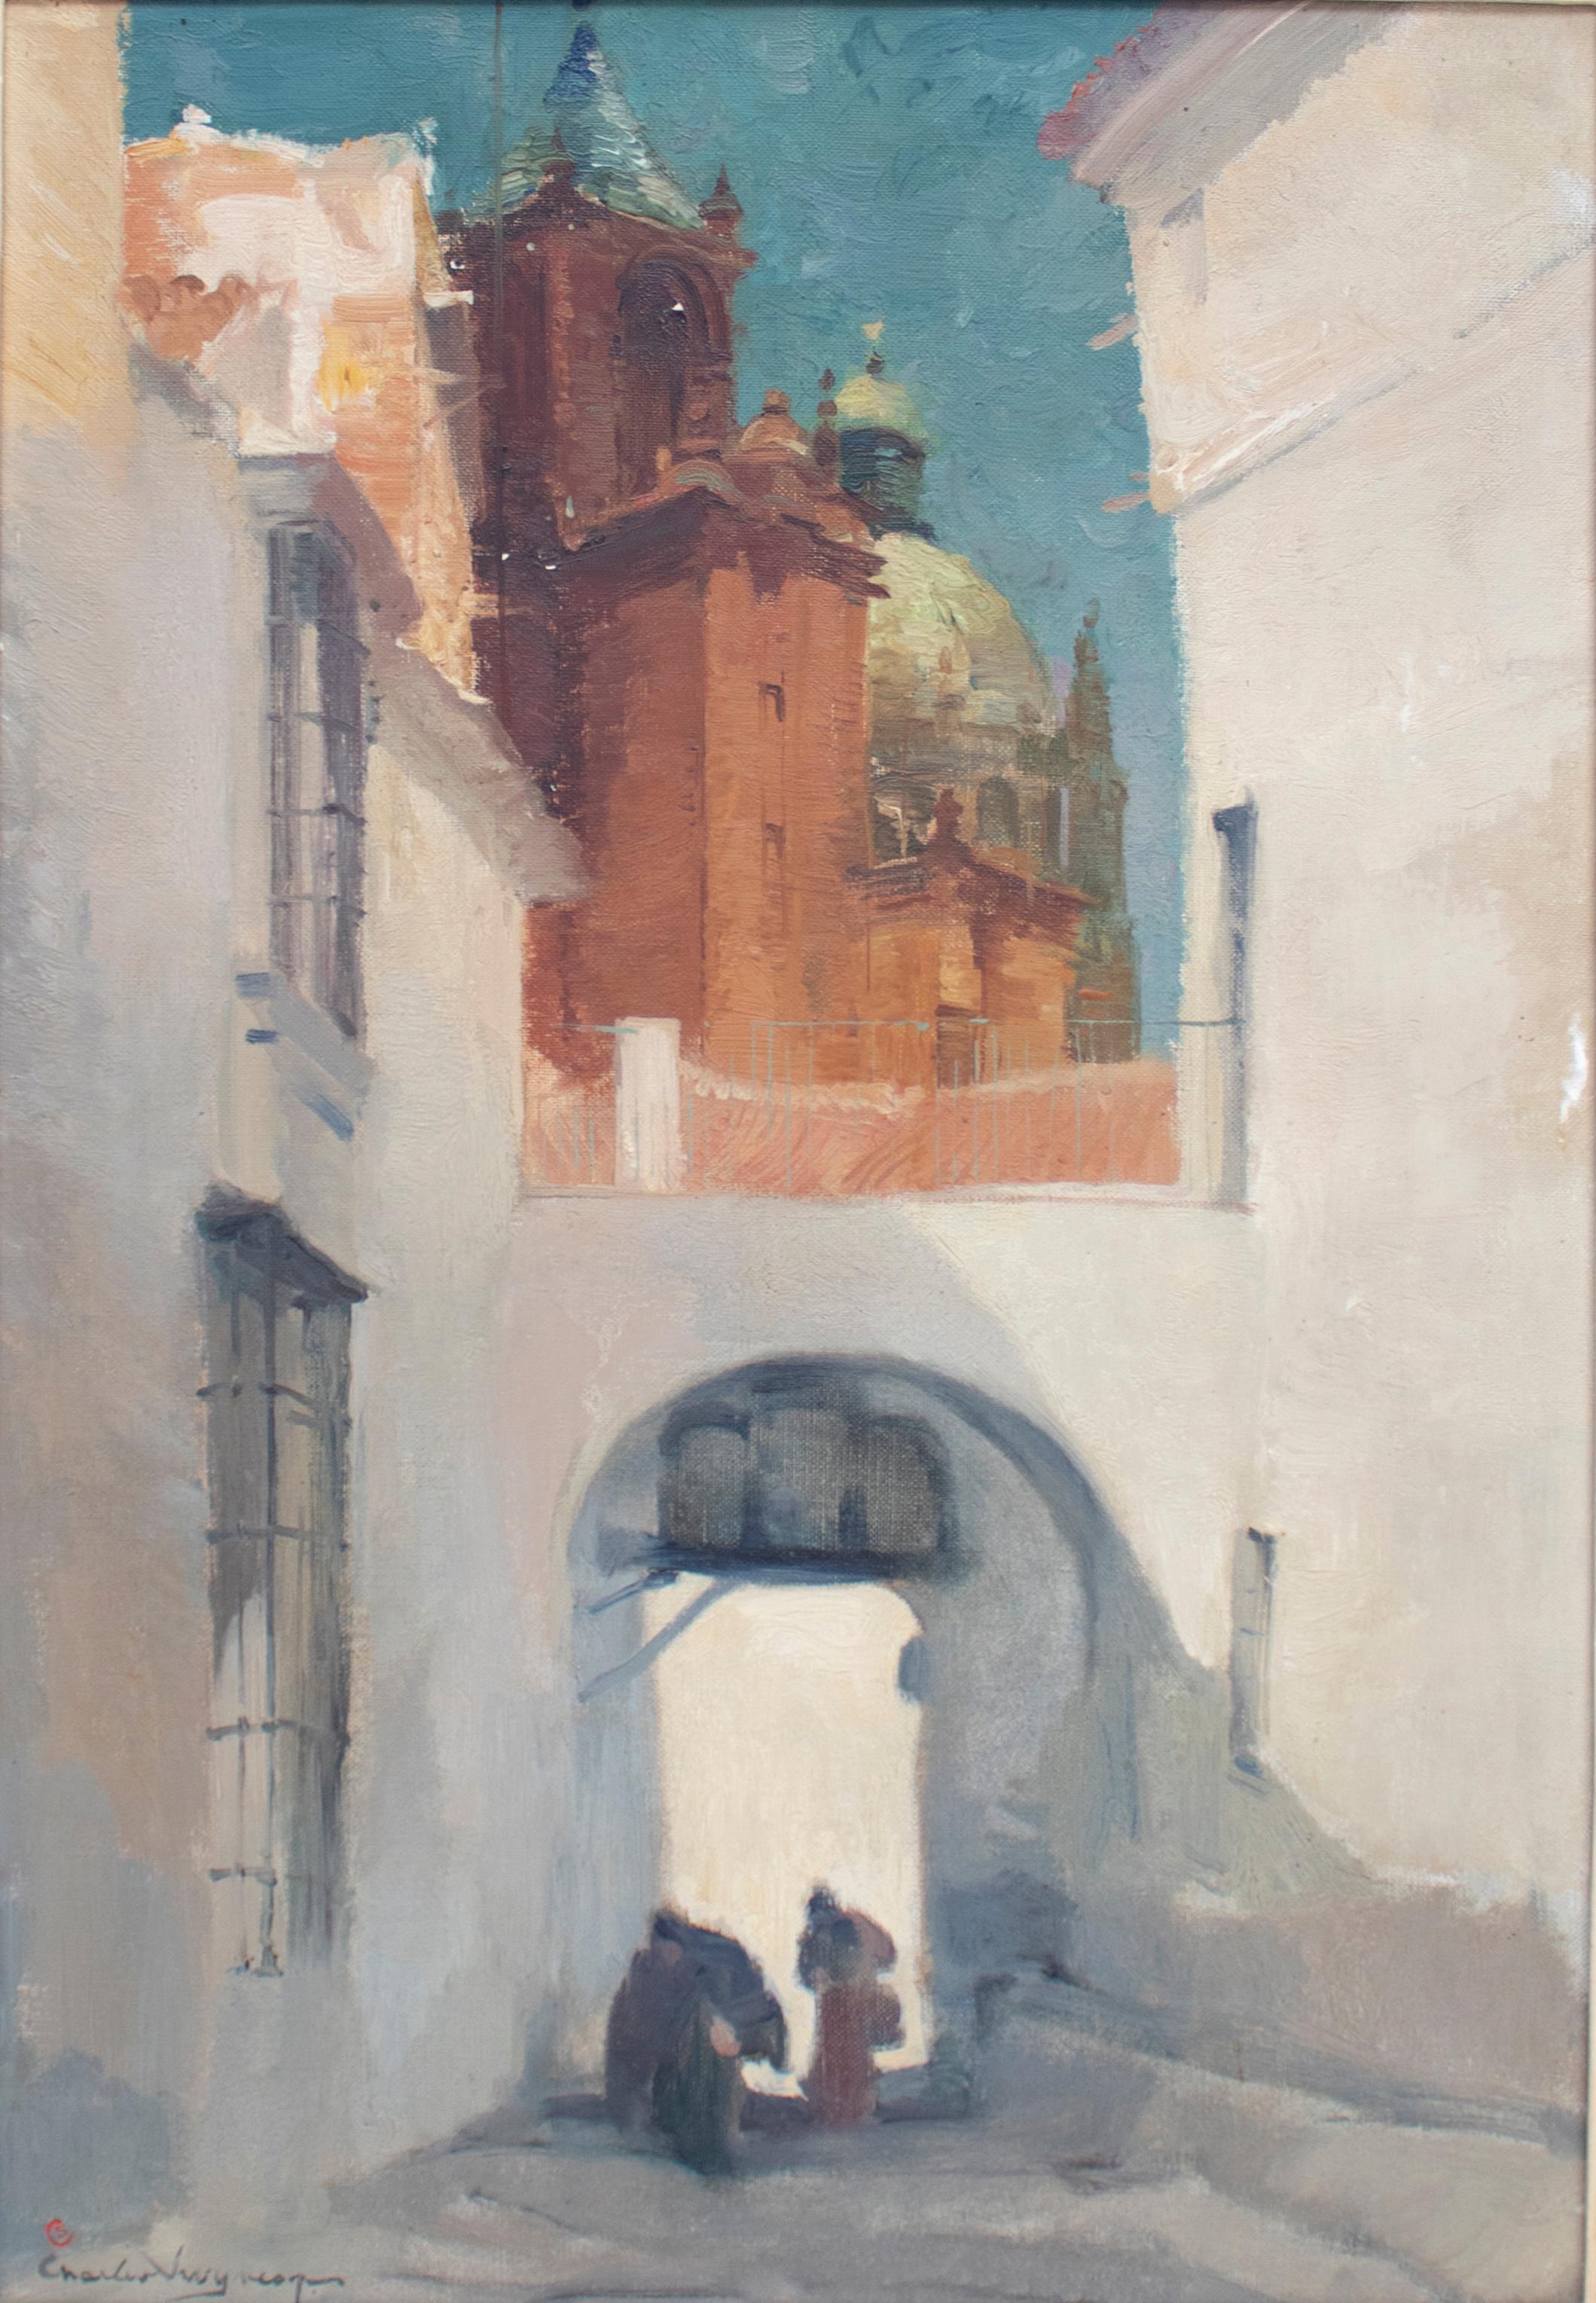 Charles Swyncop oil on canvas painting of an Andalusian Town.

An early 20th century Belgian artist, pupil to Alfred Bastien, who regularly visited Spain, where he painted landscapes, seascapes, figures and still lives.

Dimensions with frame: